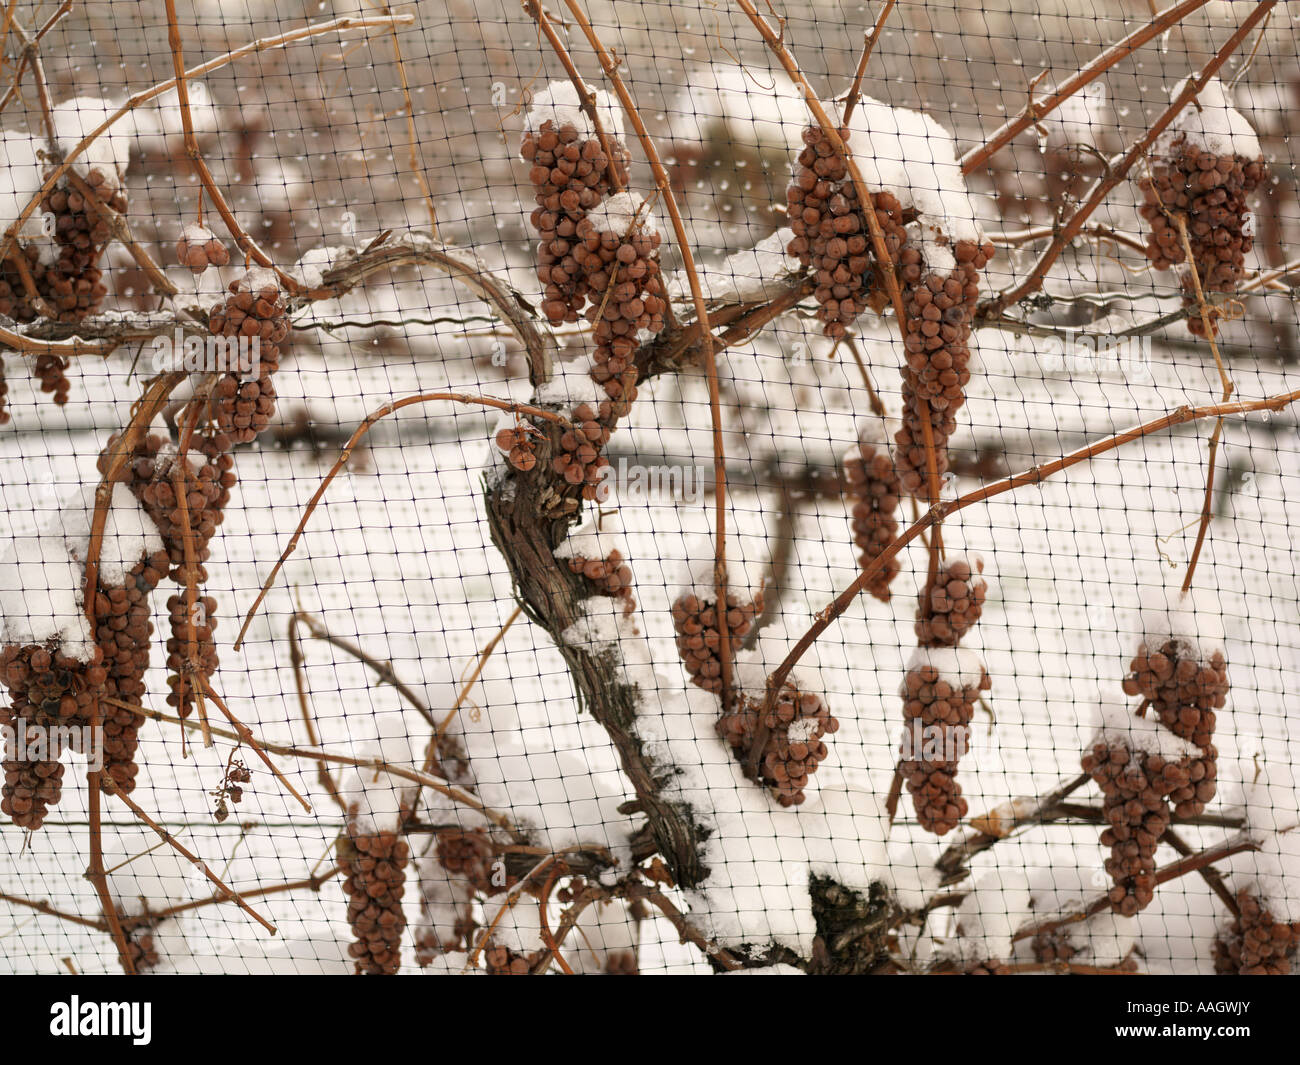 Canada,Ontario,Niagara-on-the-Lake,grapes left on the vine until winter for ice wine harvest Stock Photo